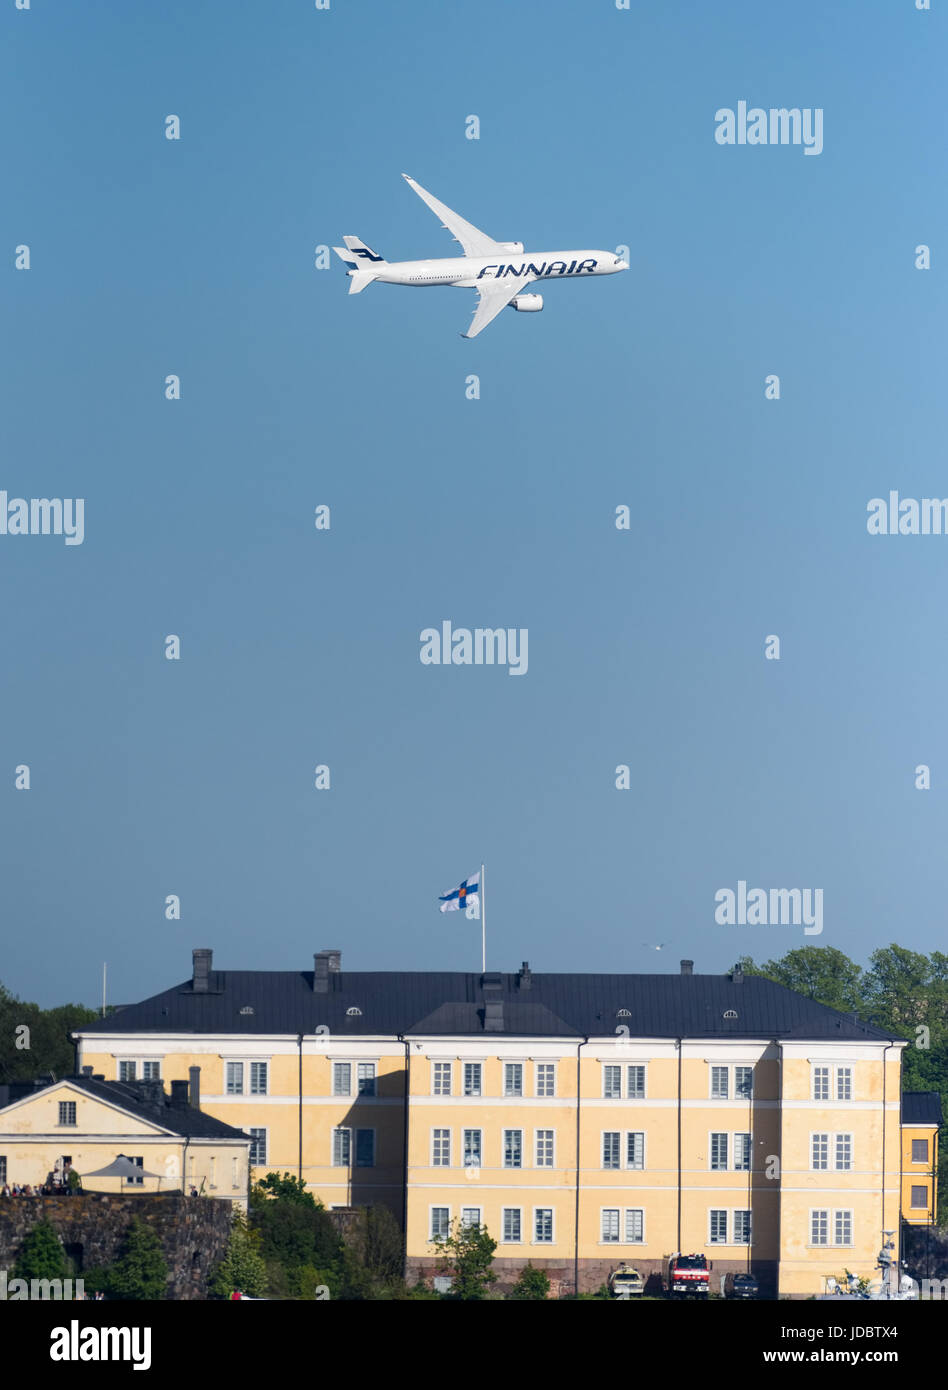 Helsinki, Finland - 9 June 2017: Finnair Airbus A350 XWB airliner flying in extremely low altitude over Suomenlinna fortress island at the Kaivopuisto Stock Photo